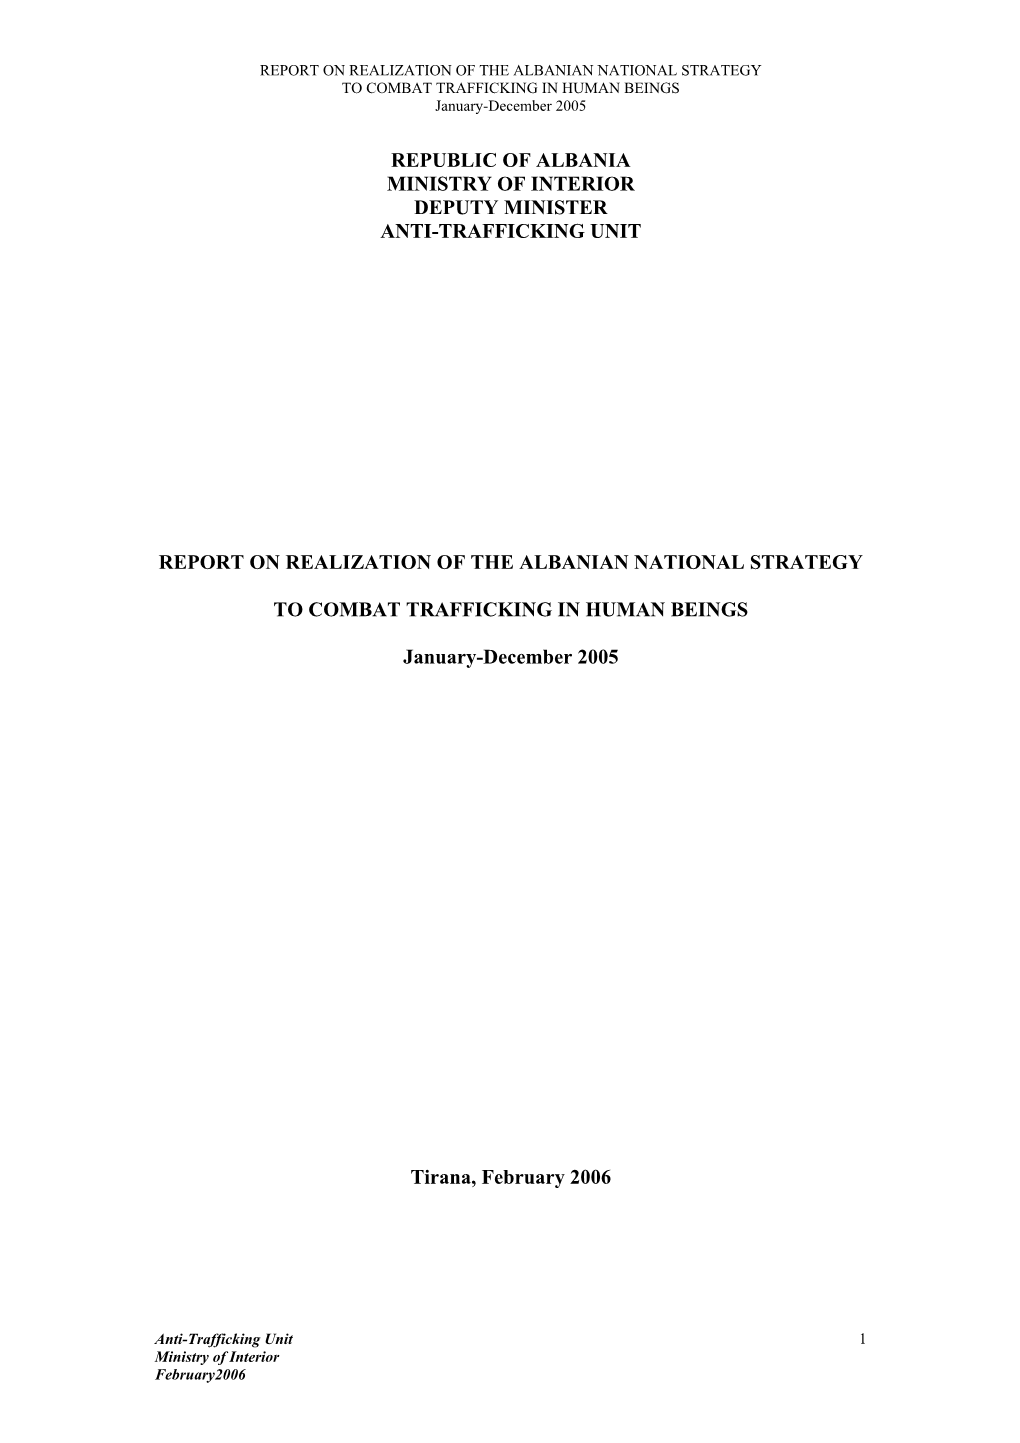 Ministry of Interior, Report on Realization of the Albanian National Strategy to Combat Trafficking in Human